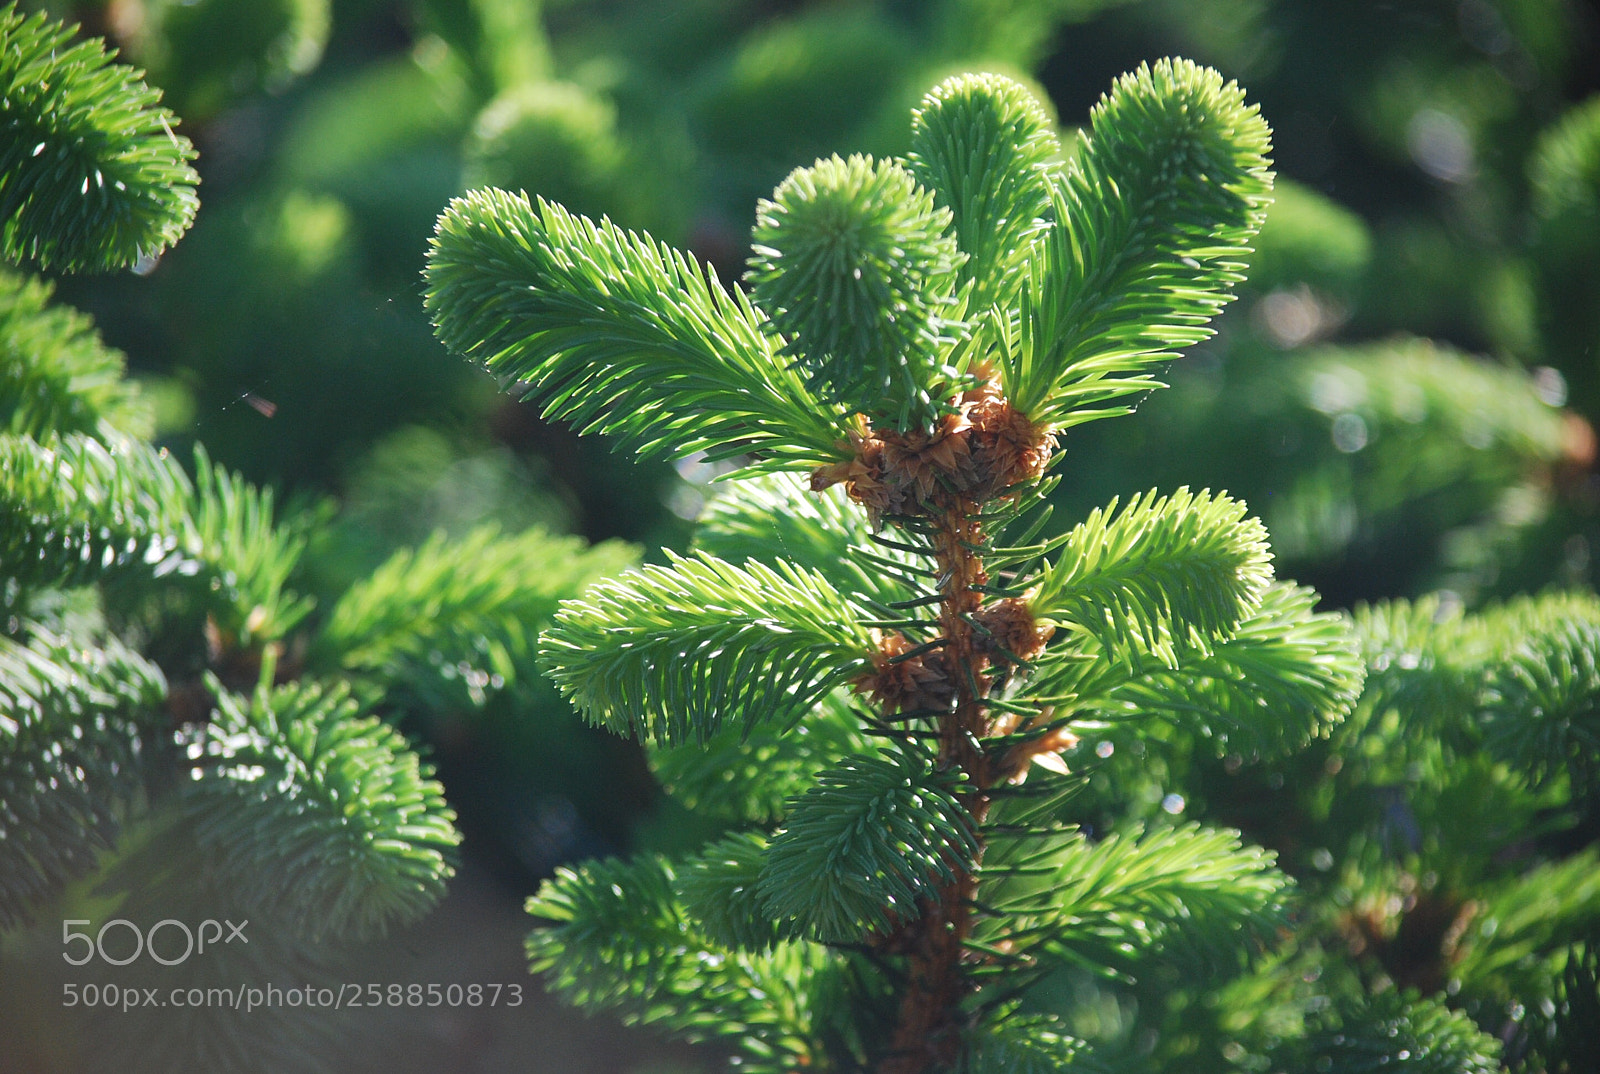 Nikon D40X sample photo. Norway spruce budding out photography